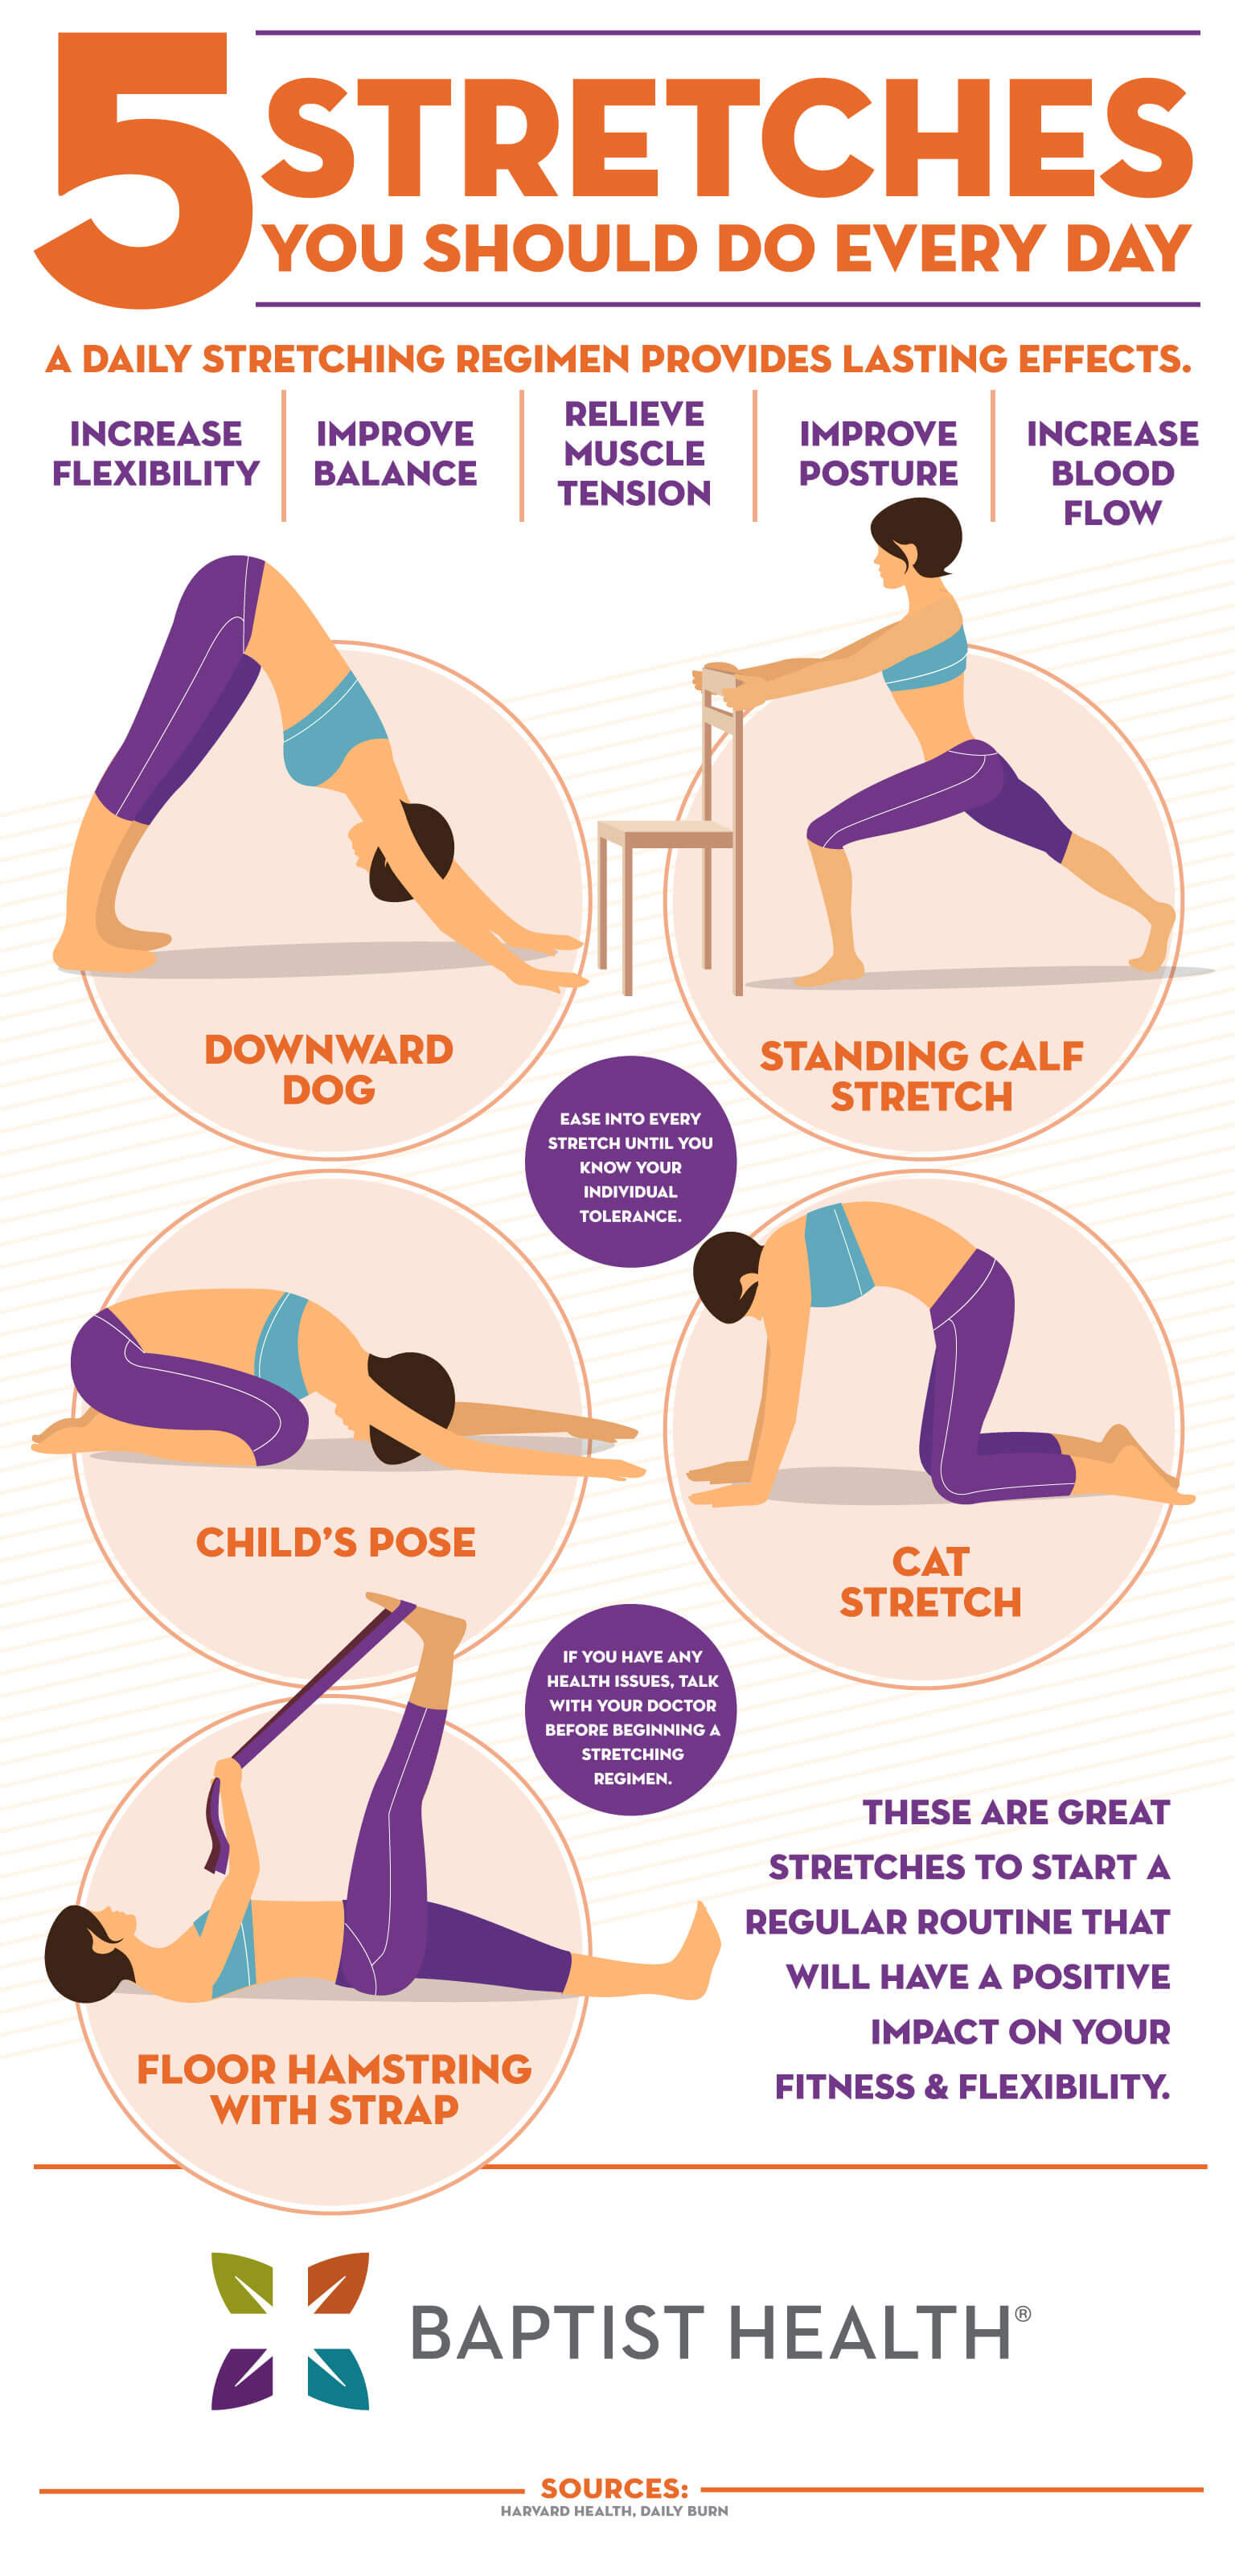 5 Stretches To Do Every Morning • Foodie Loves Fitness